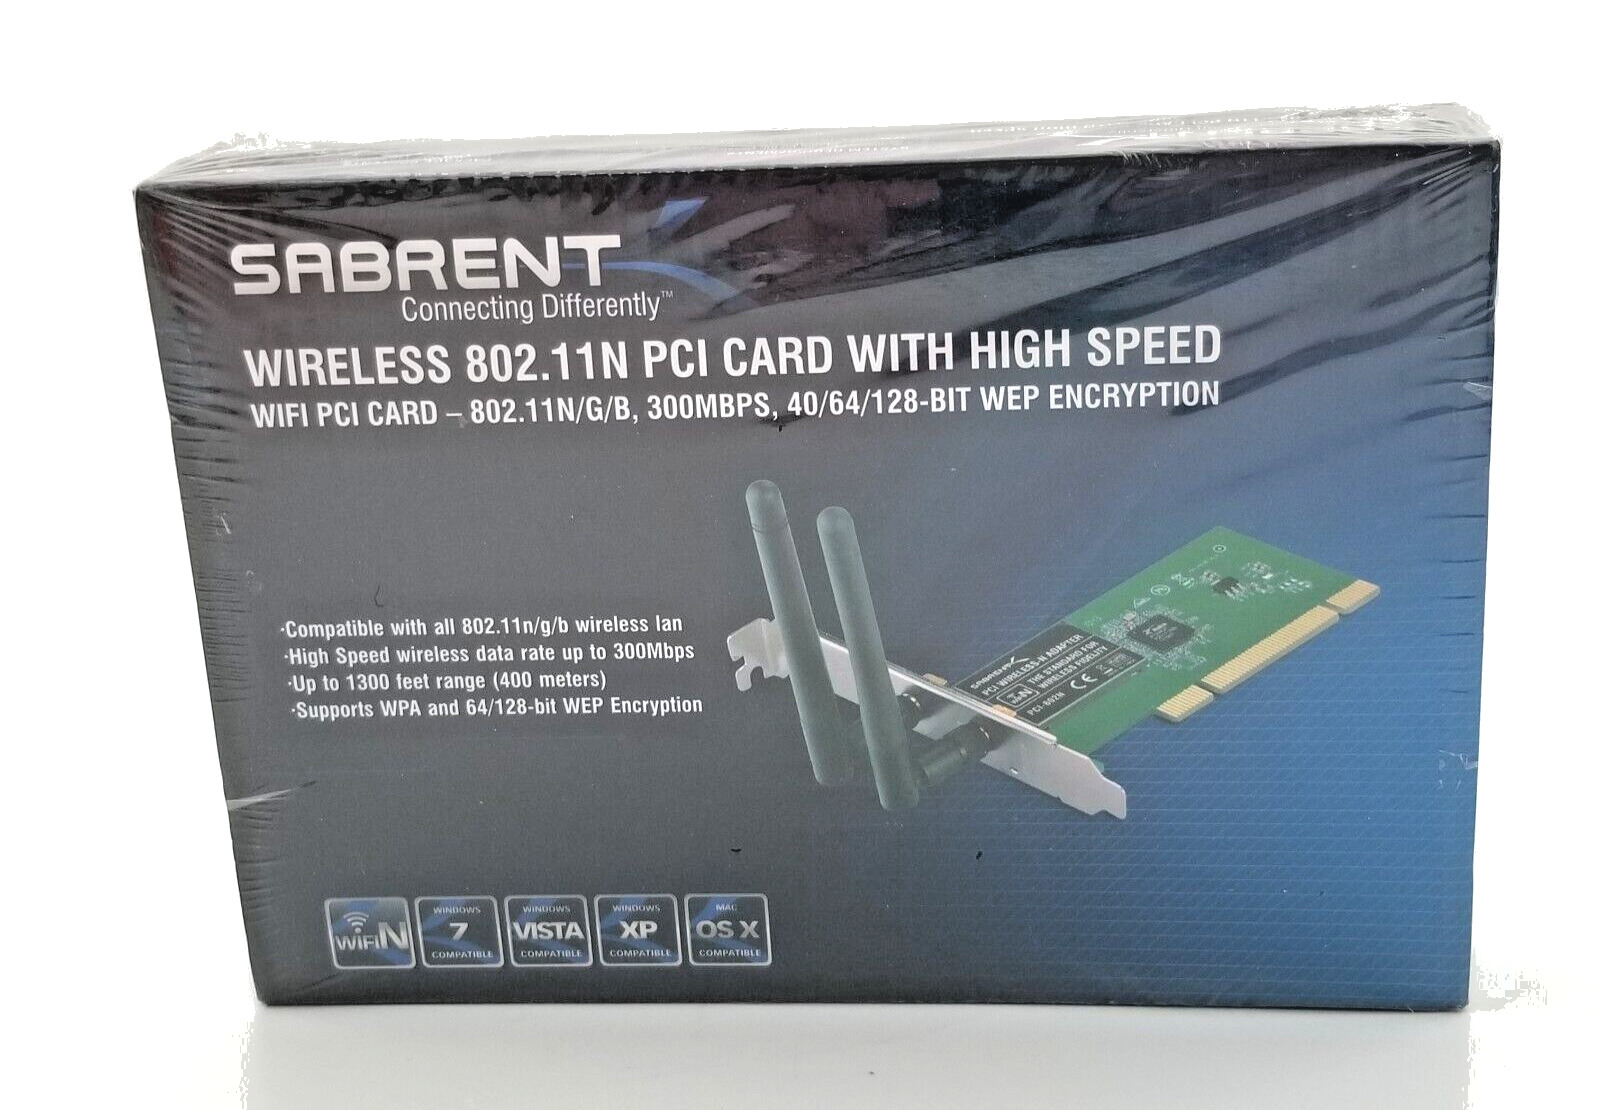 Sabrent Wireless 802.11N PCI Card w/ High Speed WPA & WEP Encryption New/Sealed